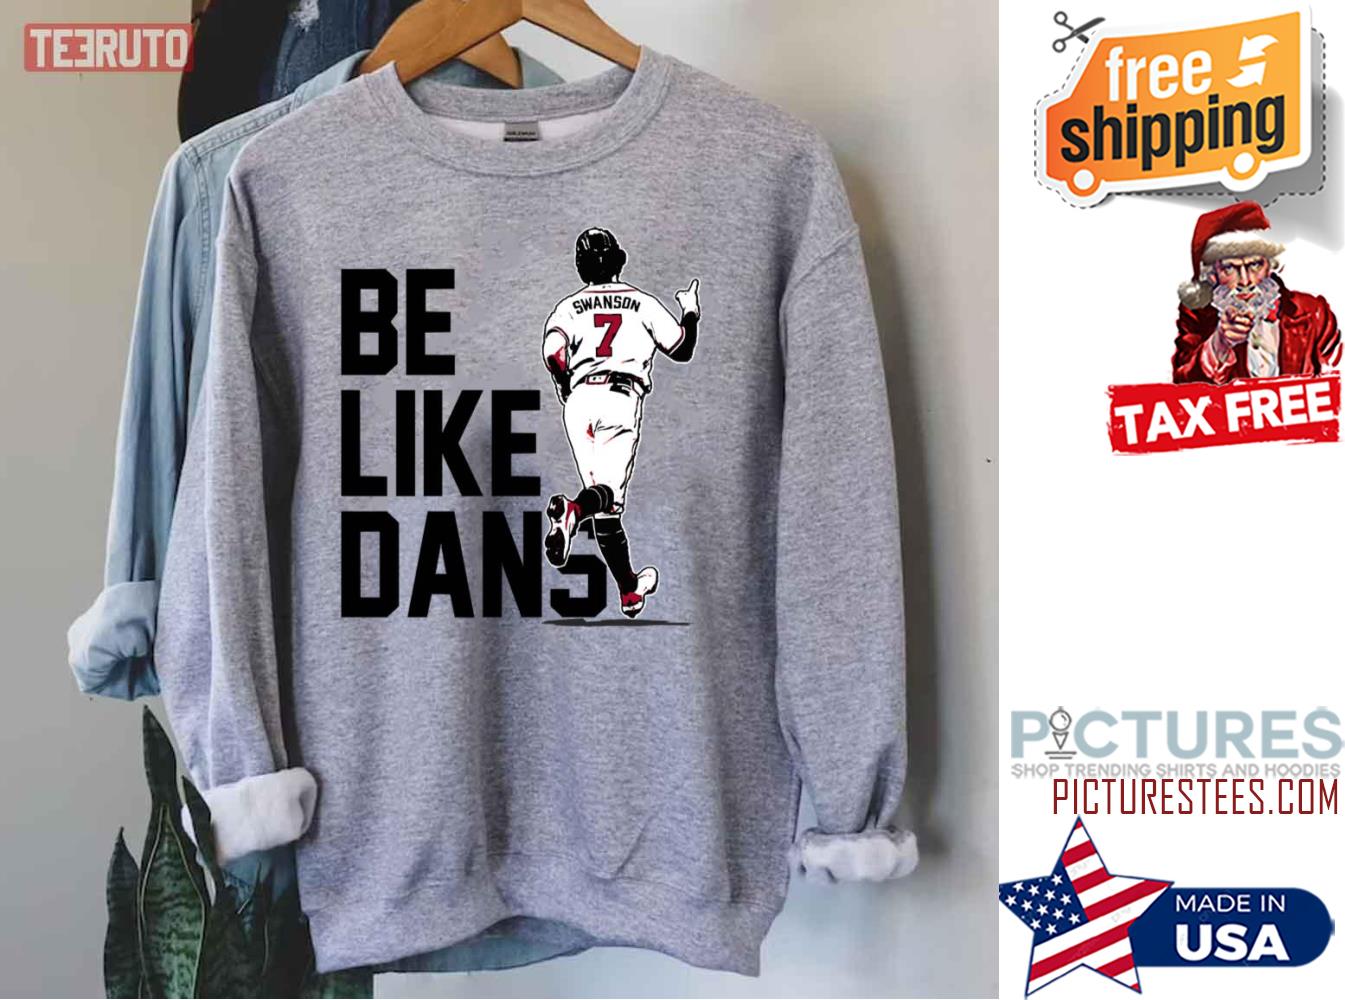 Order Dansby Swanson T-Shirt